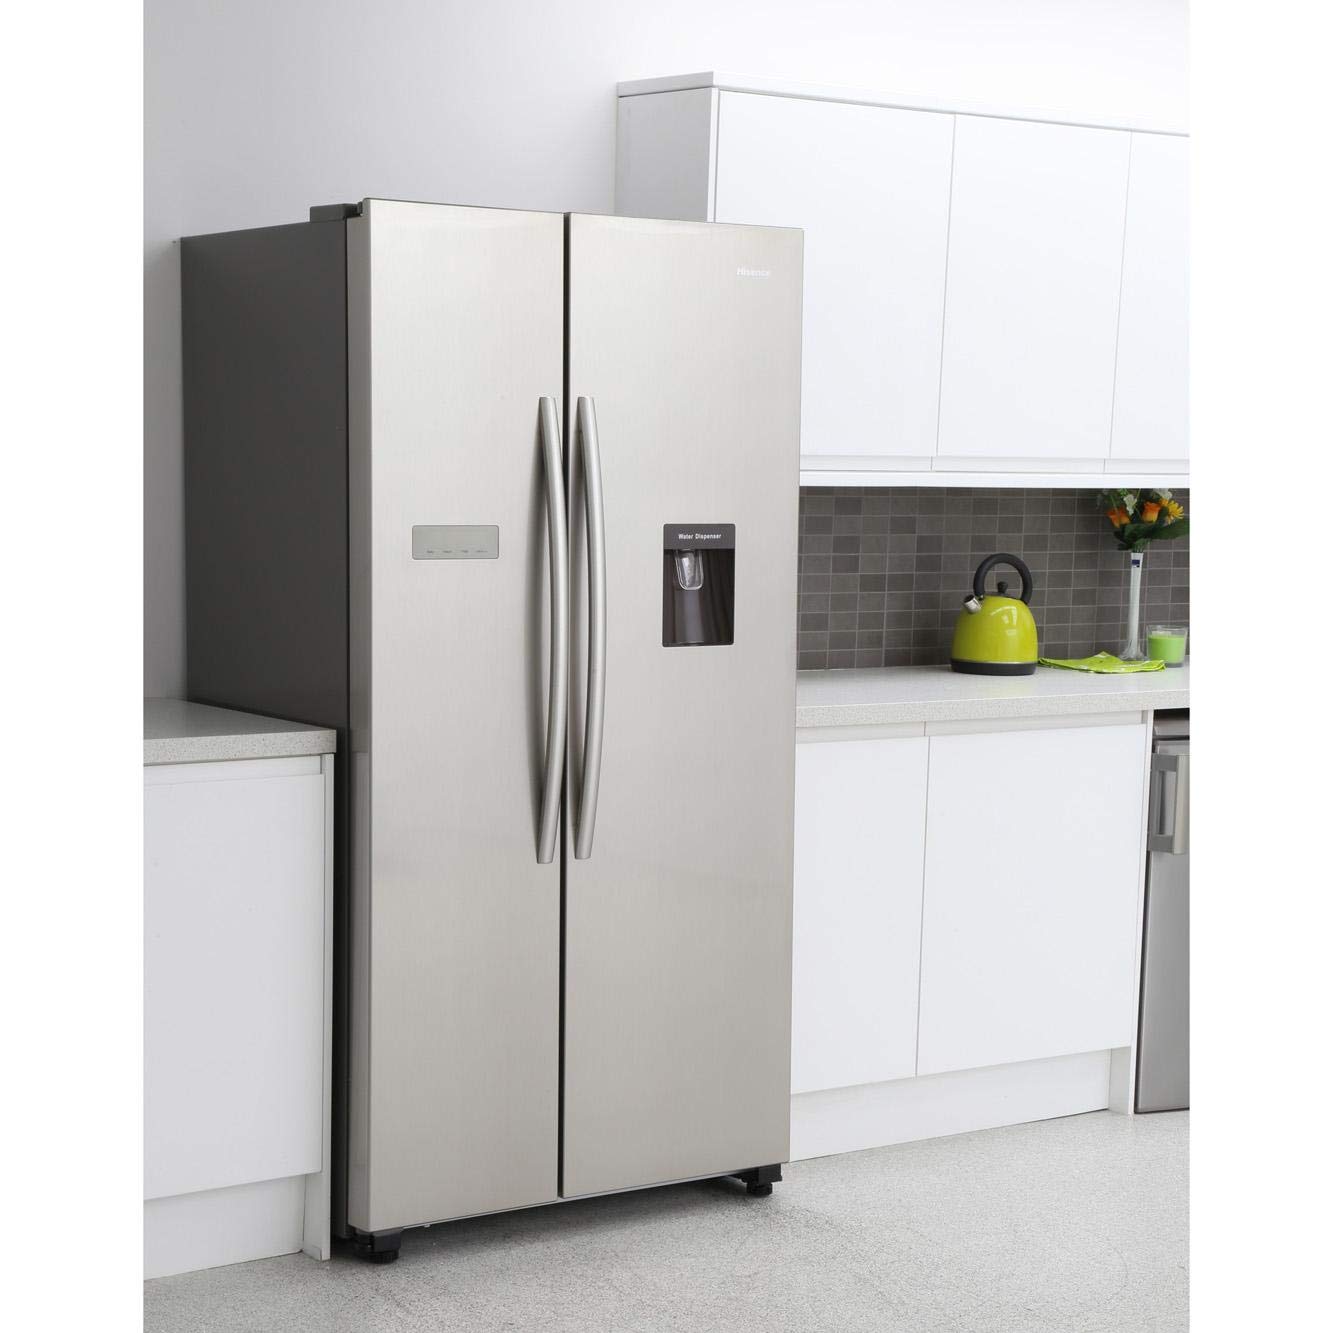 Hisense RS741N4WC11 (Stainless Steel), Refrigerators Reviews and Comments